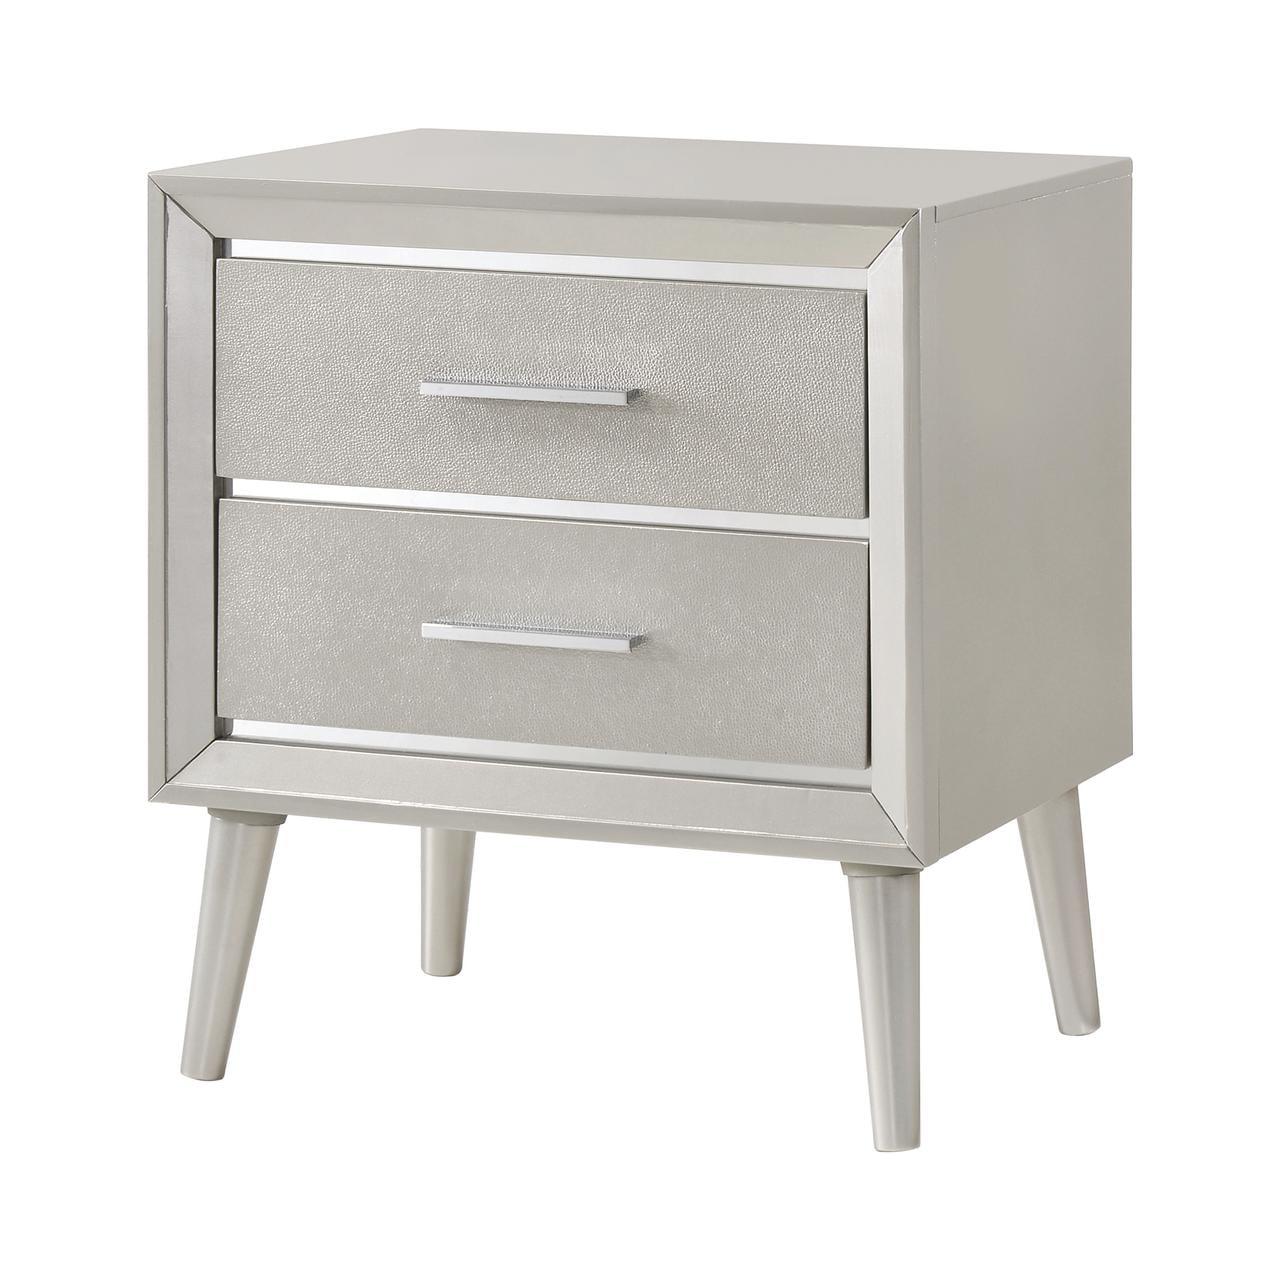 Elegant Transitional 2-Drawer Nightstand in Metallic Silver with Tapered Legs